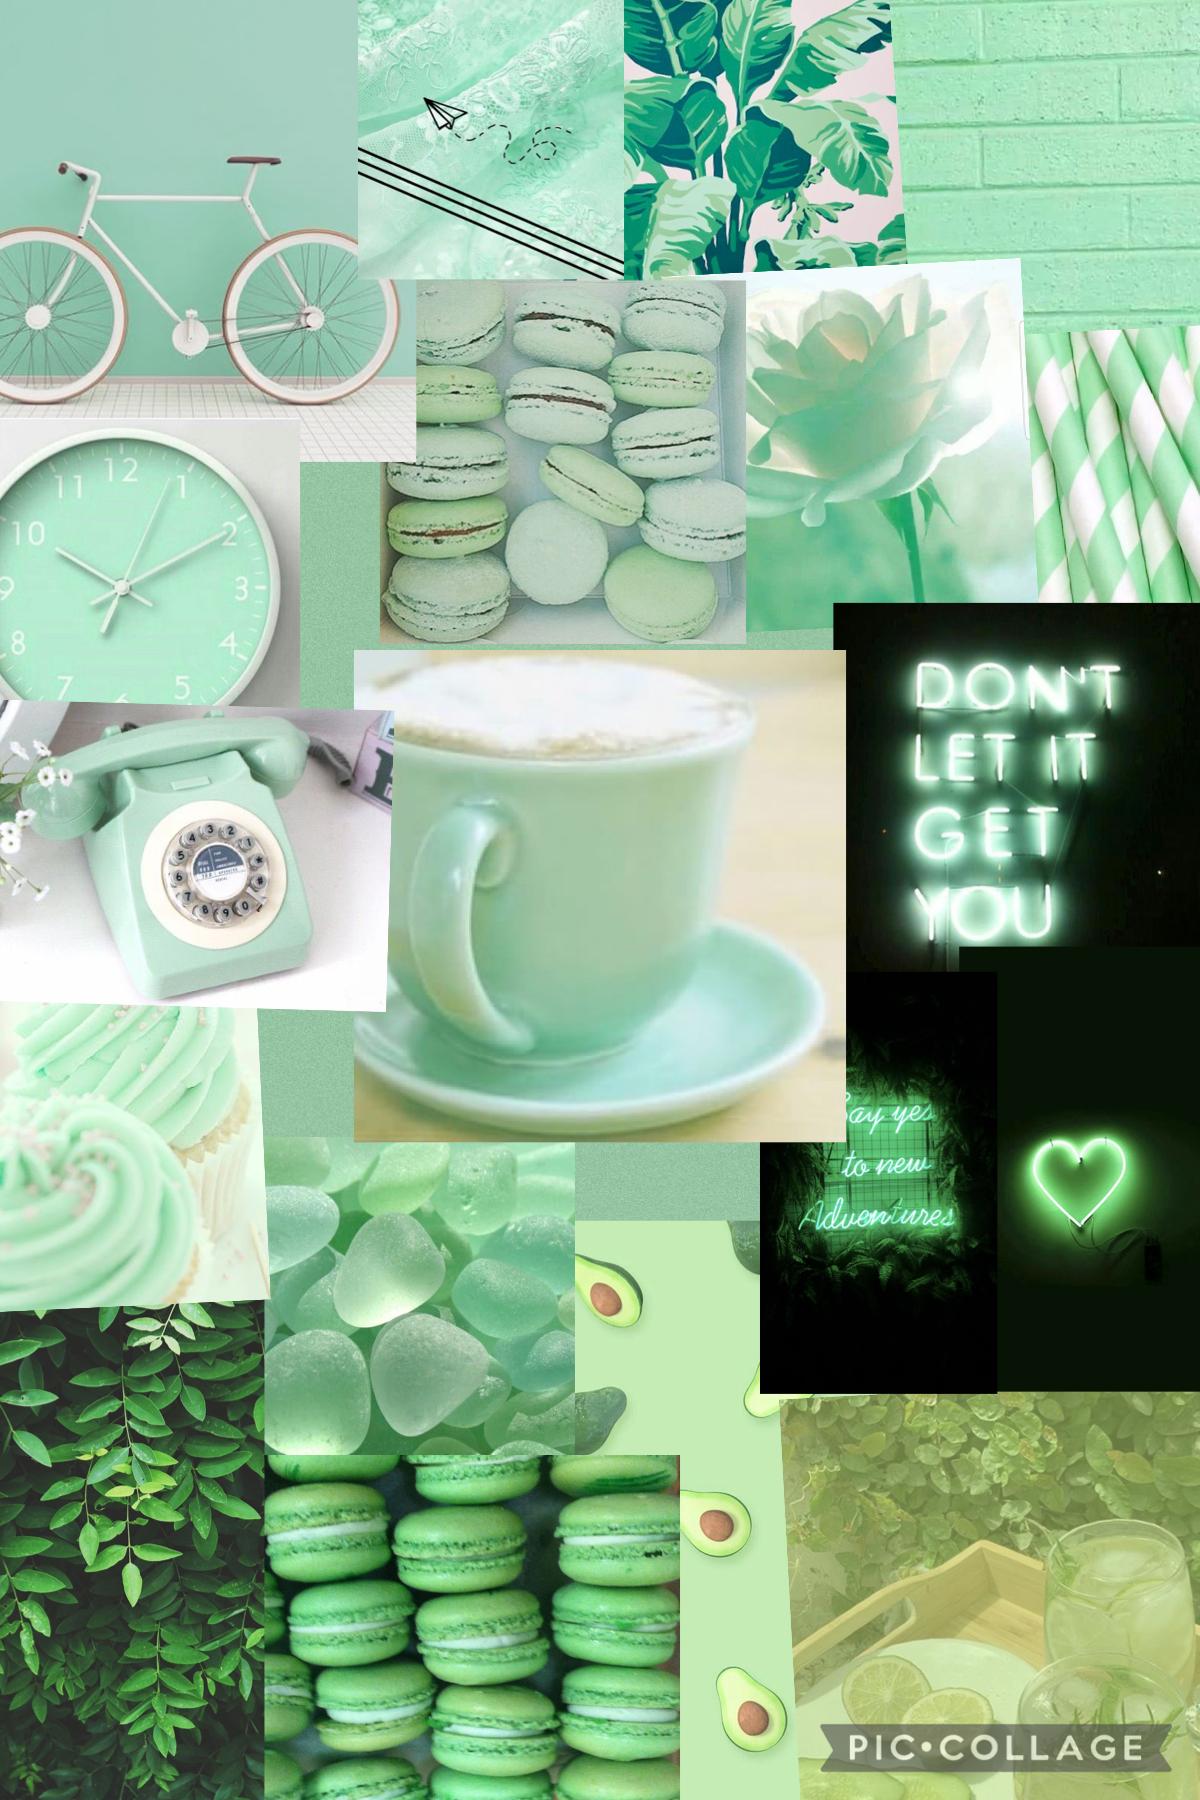 Tap me!!
My green poster. For me, mint green is a really aesthetic colour, so I decided to make a green poster to join my others! Hope you enjoy!